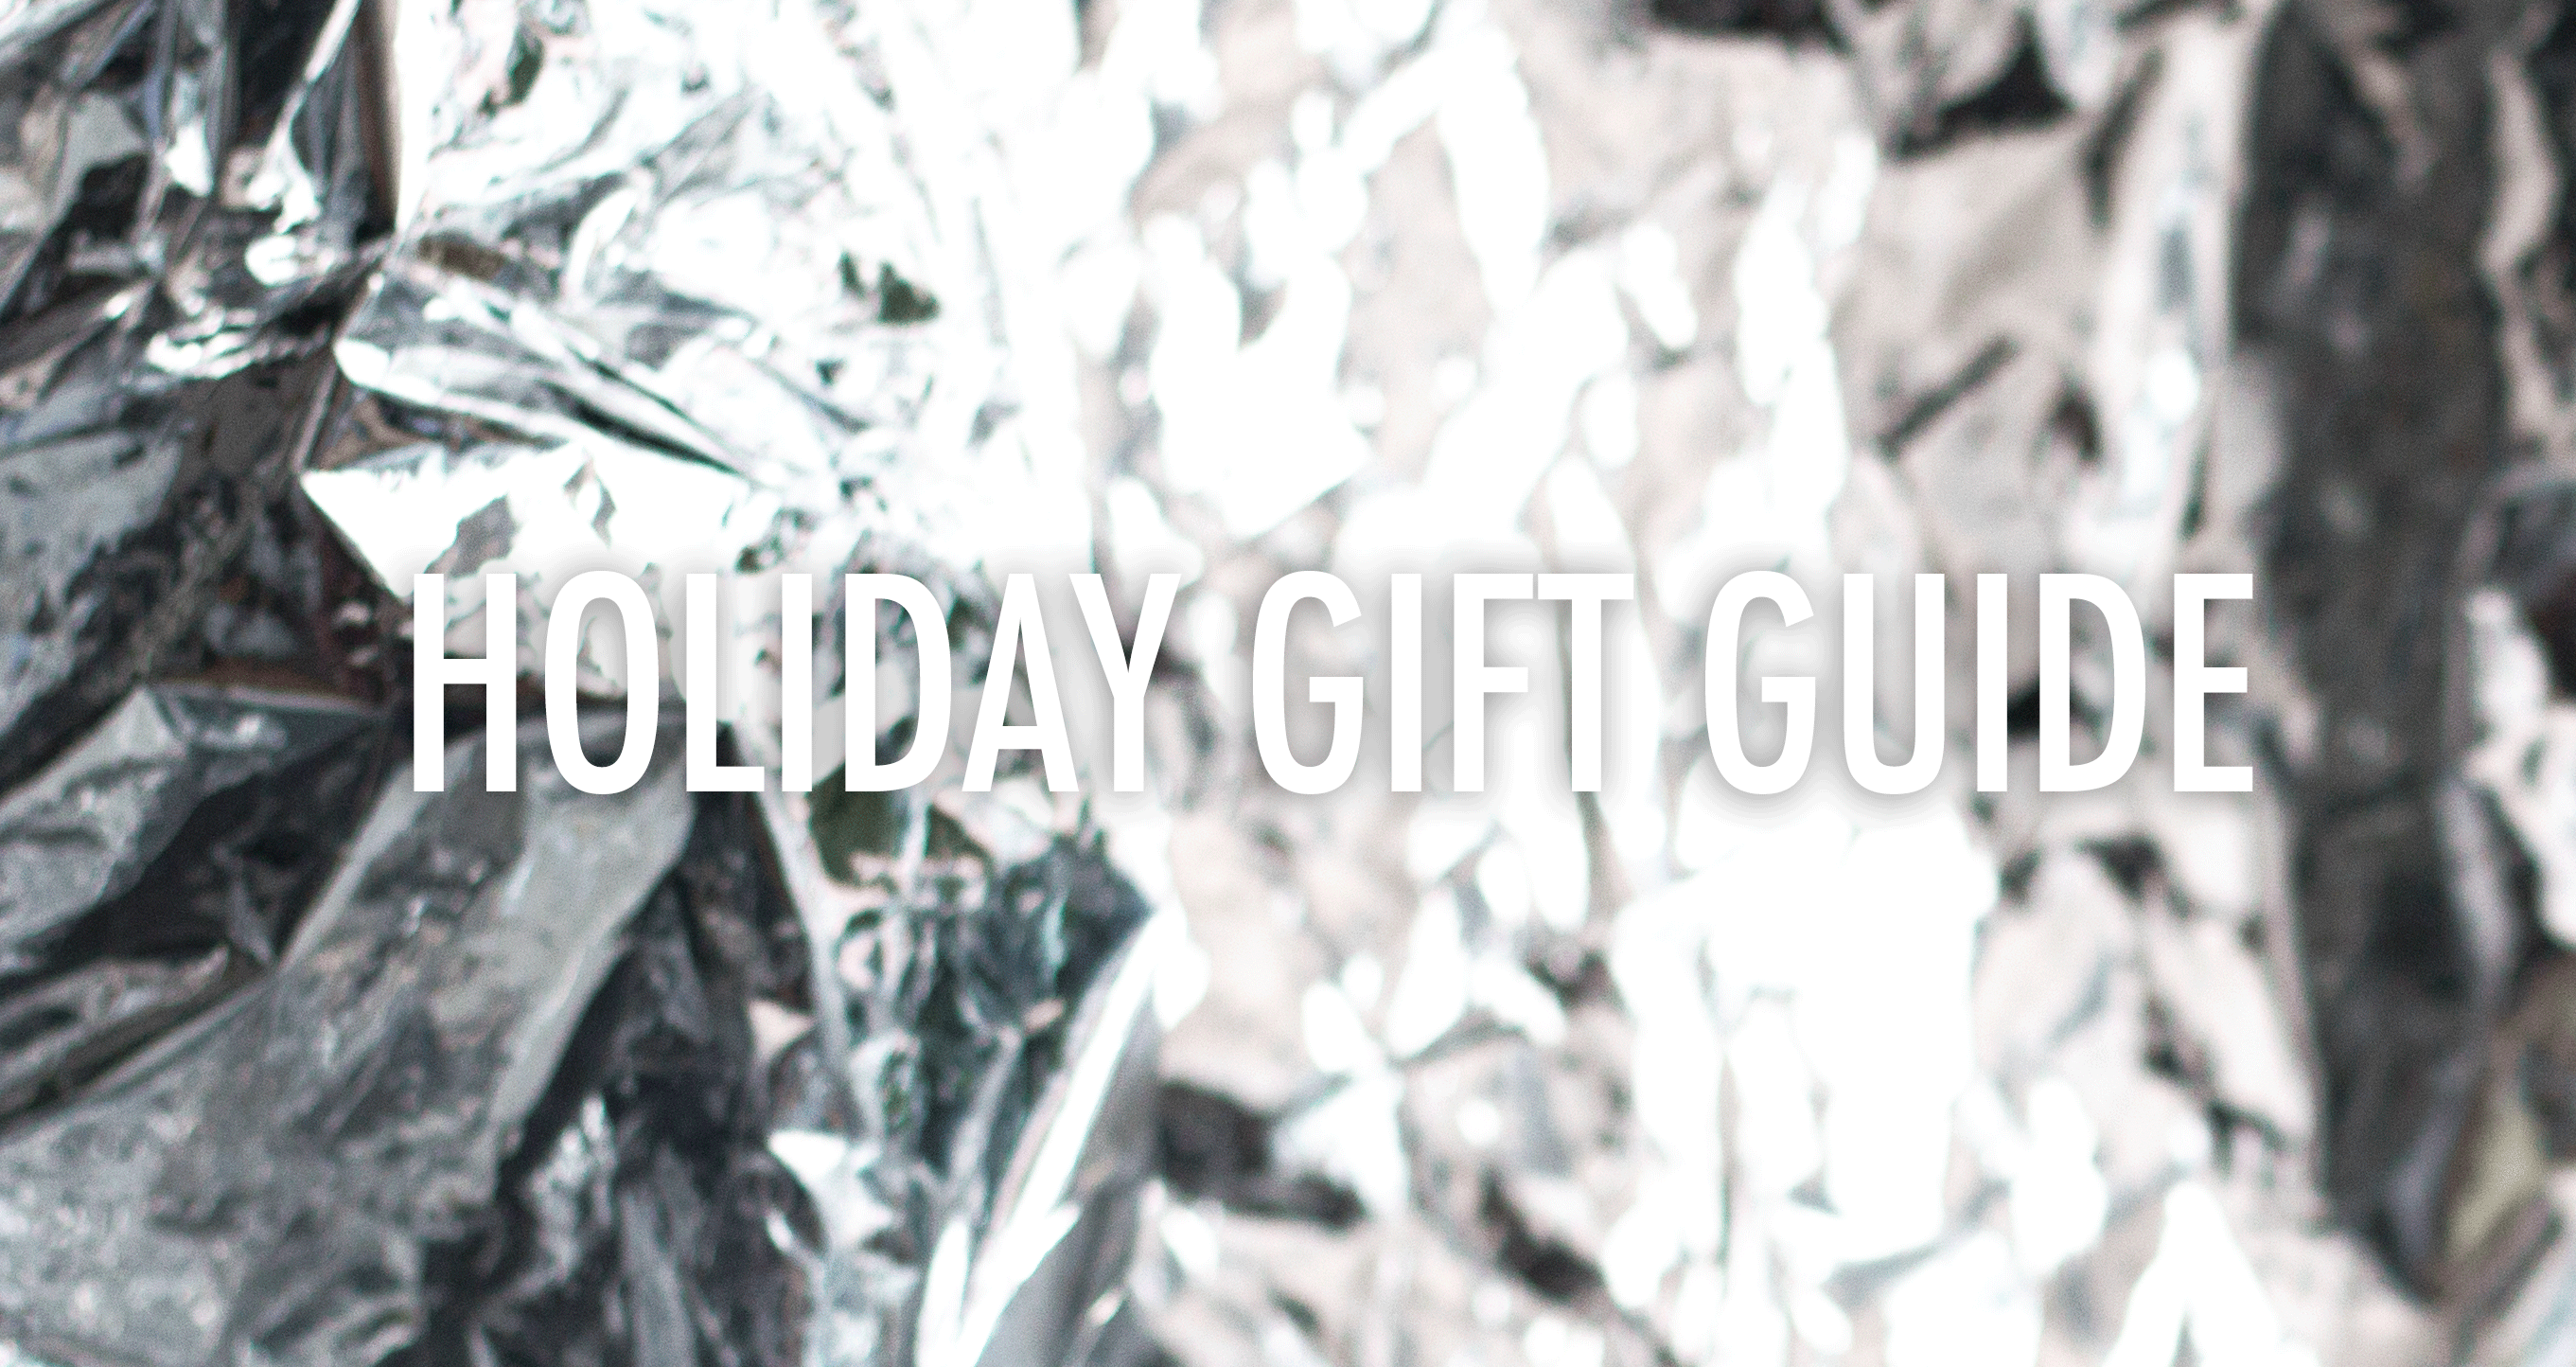 HOLIDAY-GIFT-GUIDE-SHOPIFY-gif